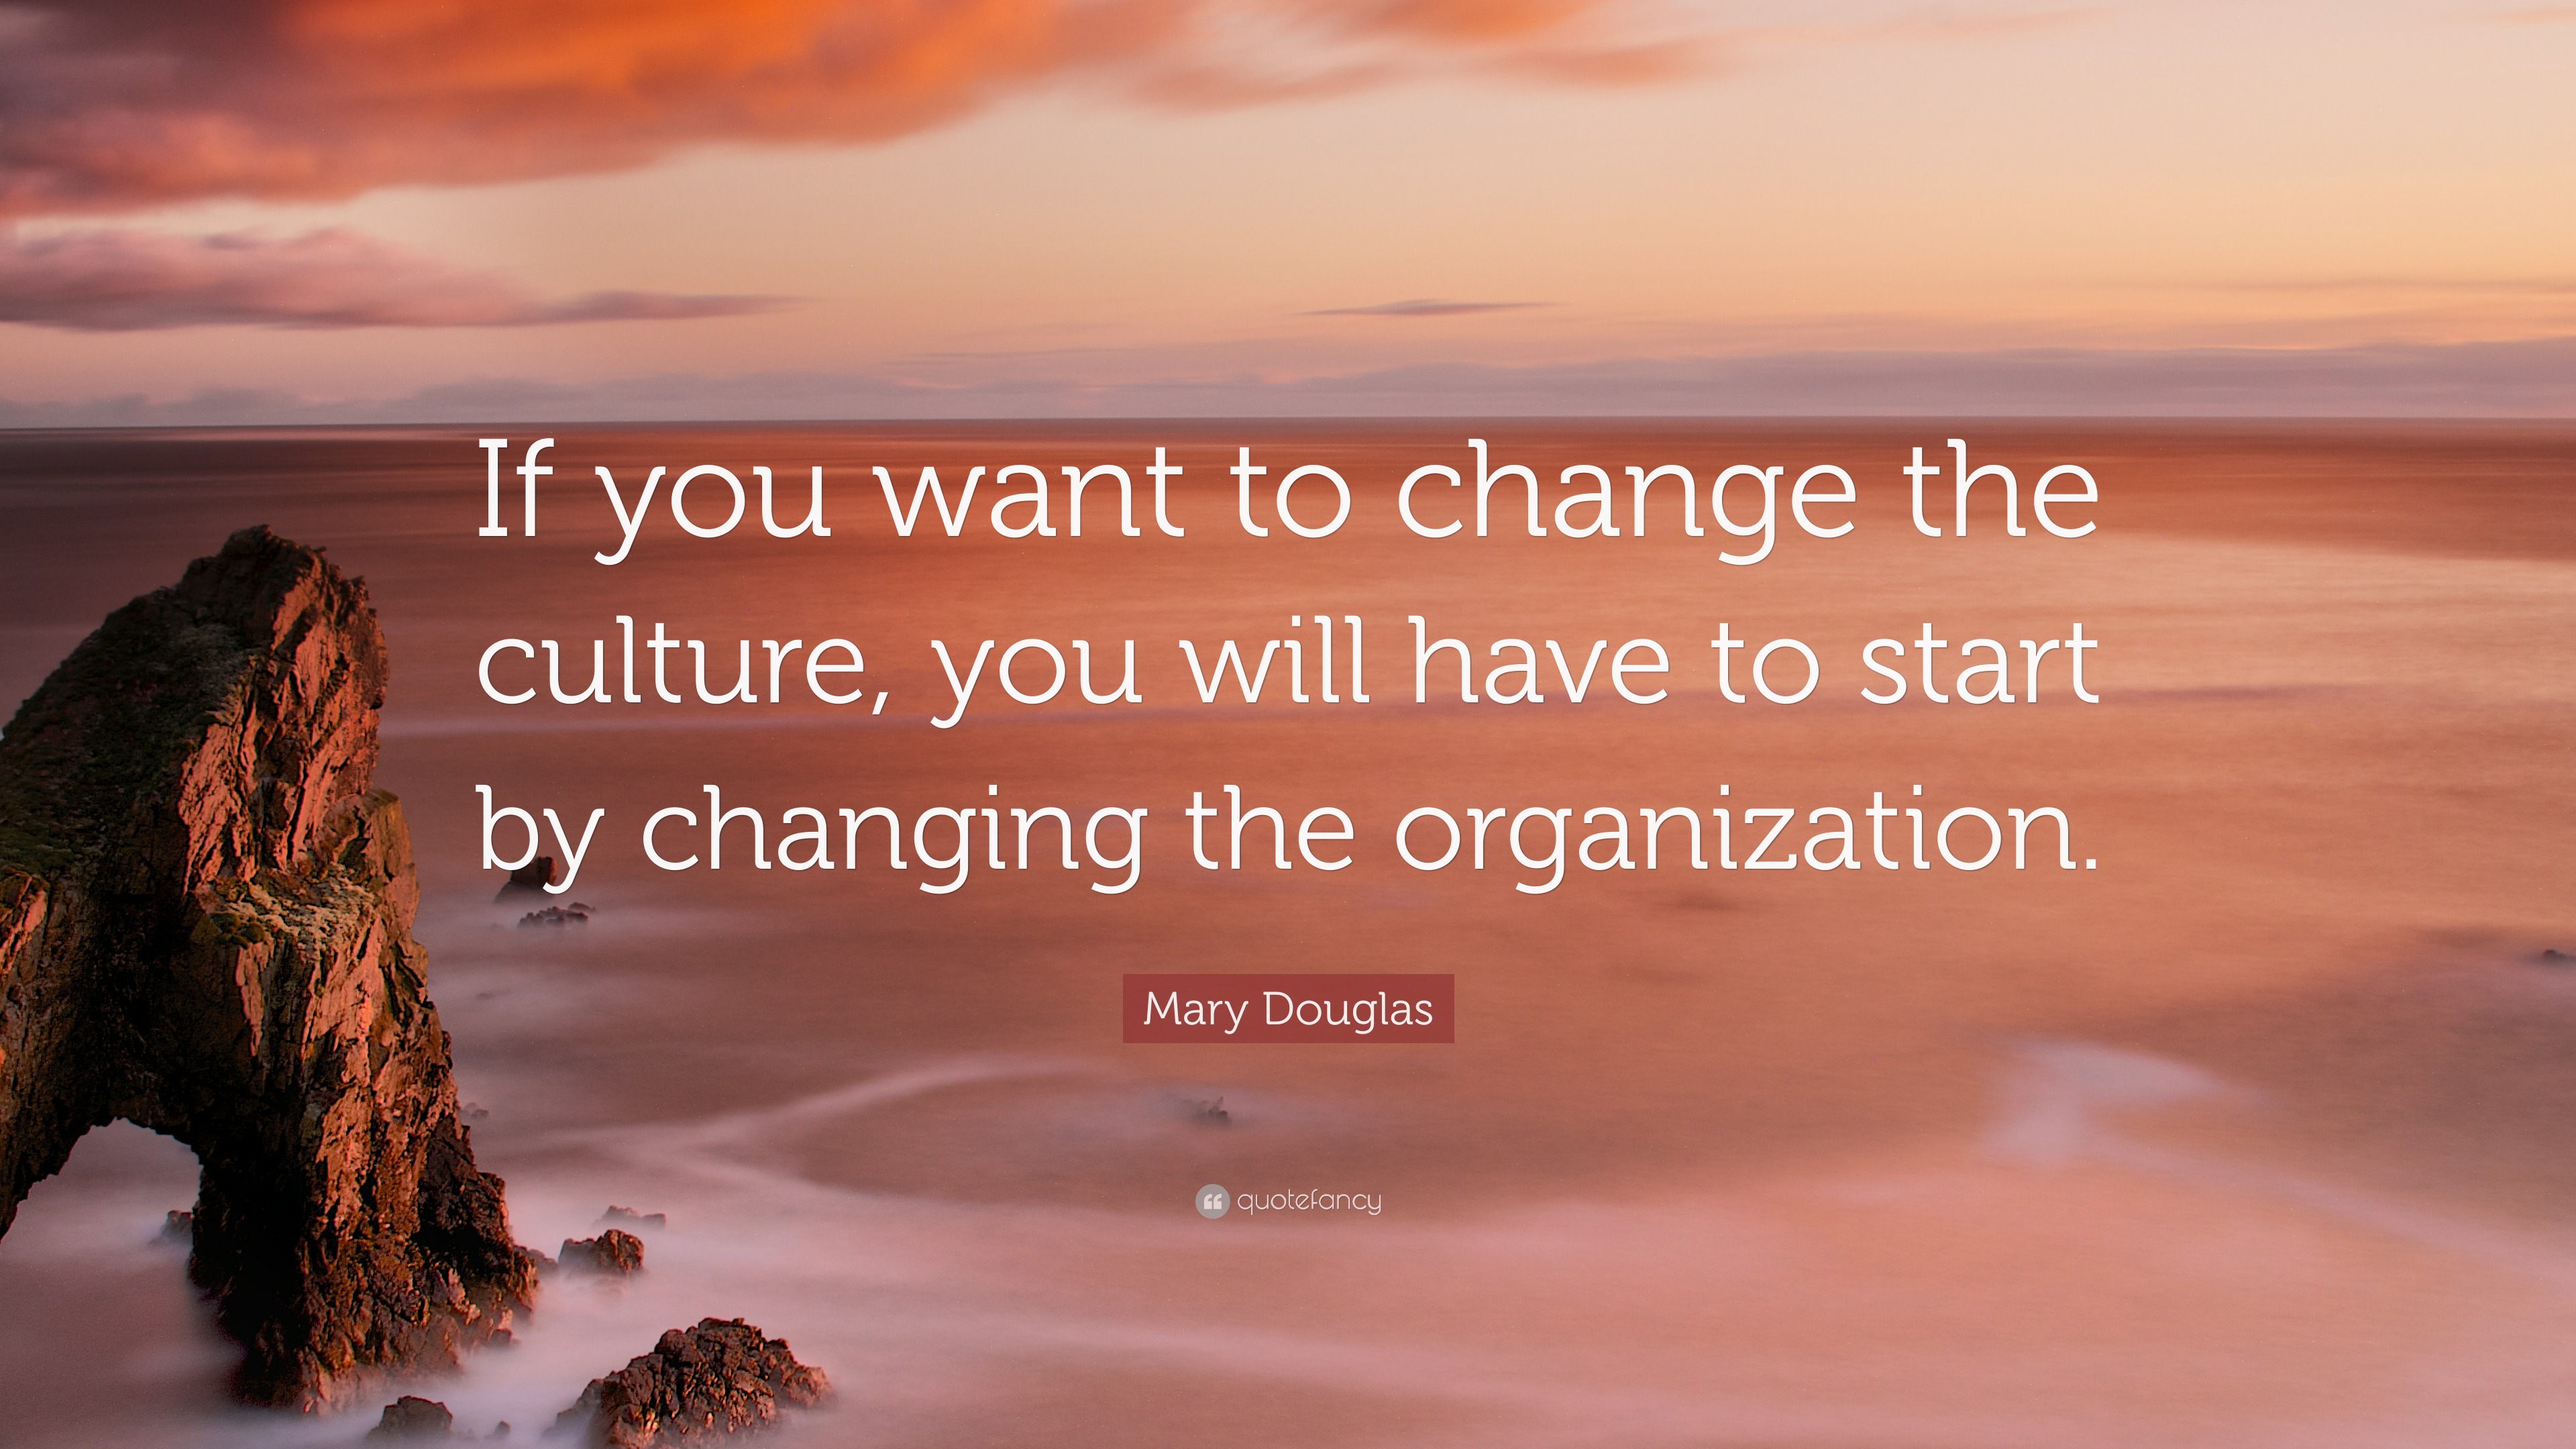 Culture change quote changing quotes douglas mary organization want if will start inspirational motivational quotefancy